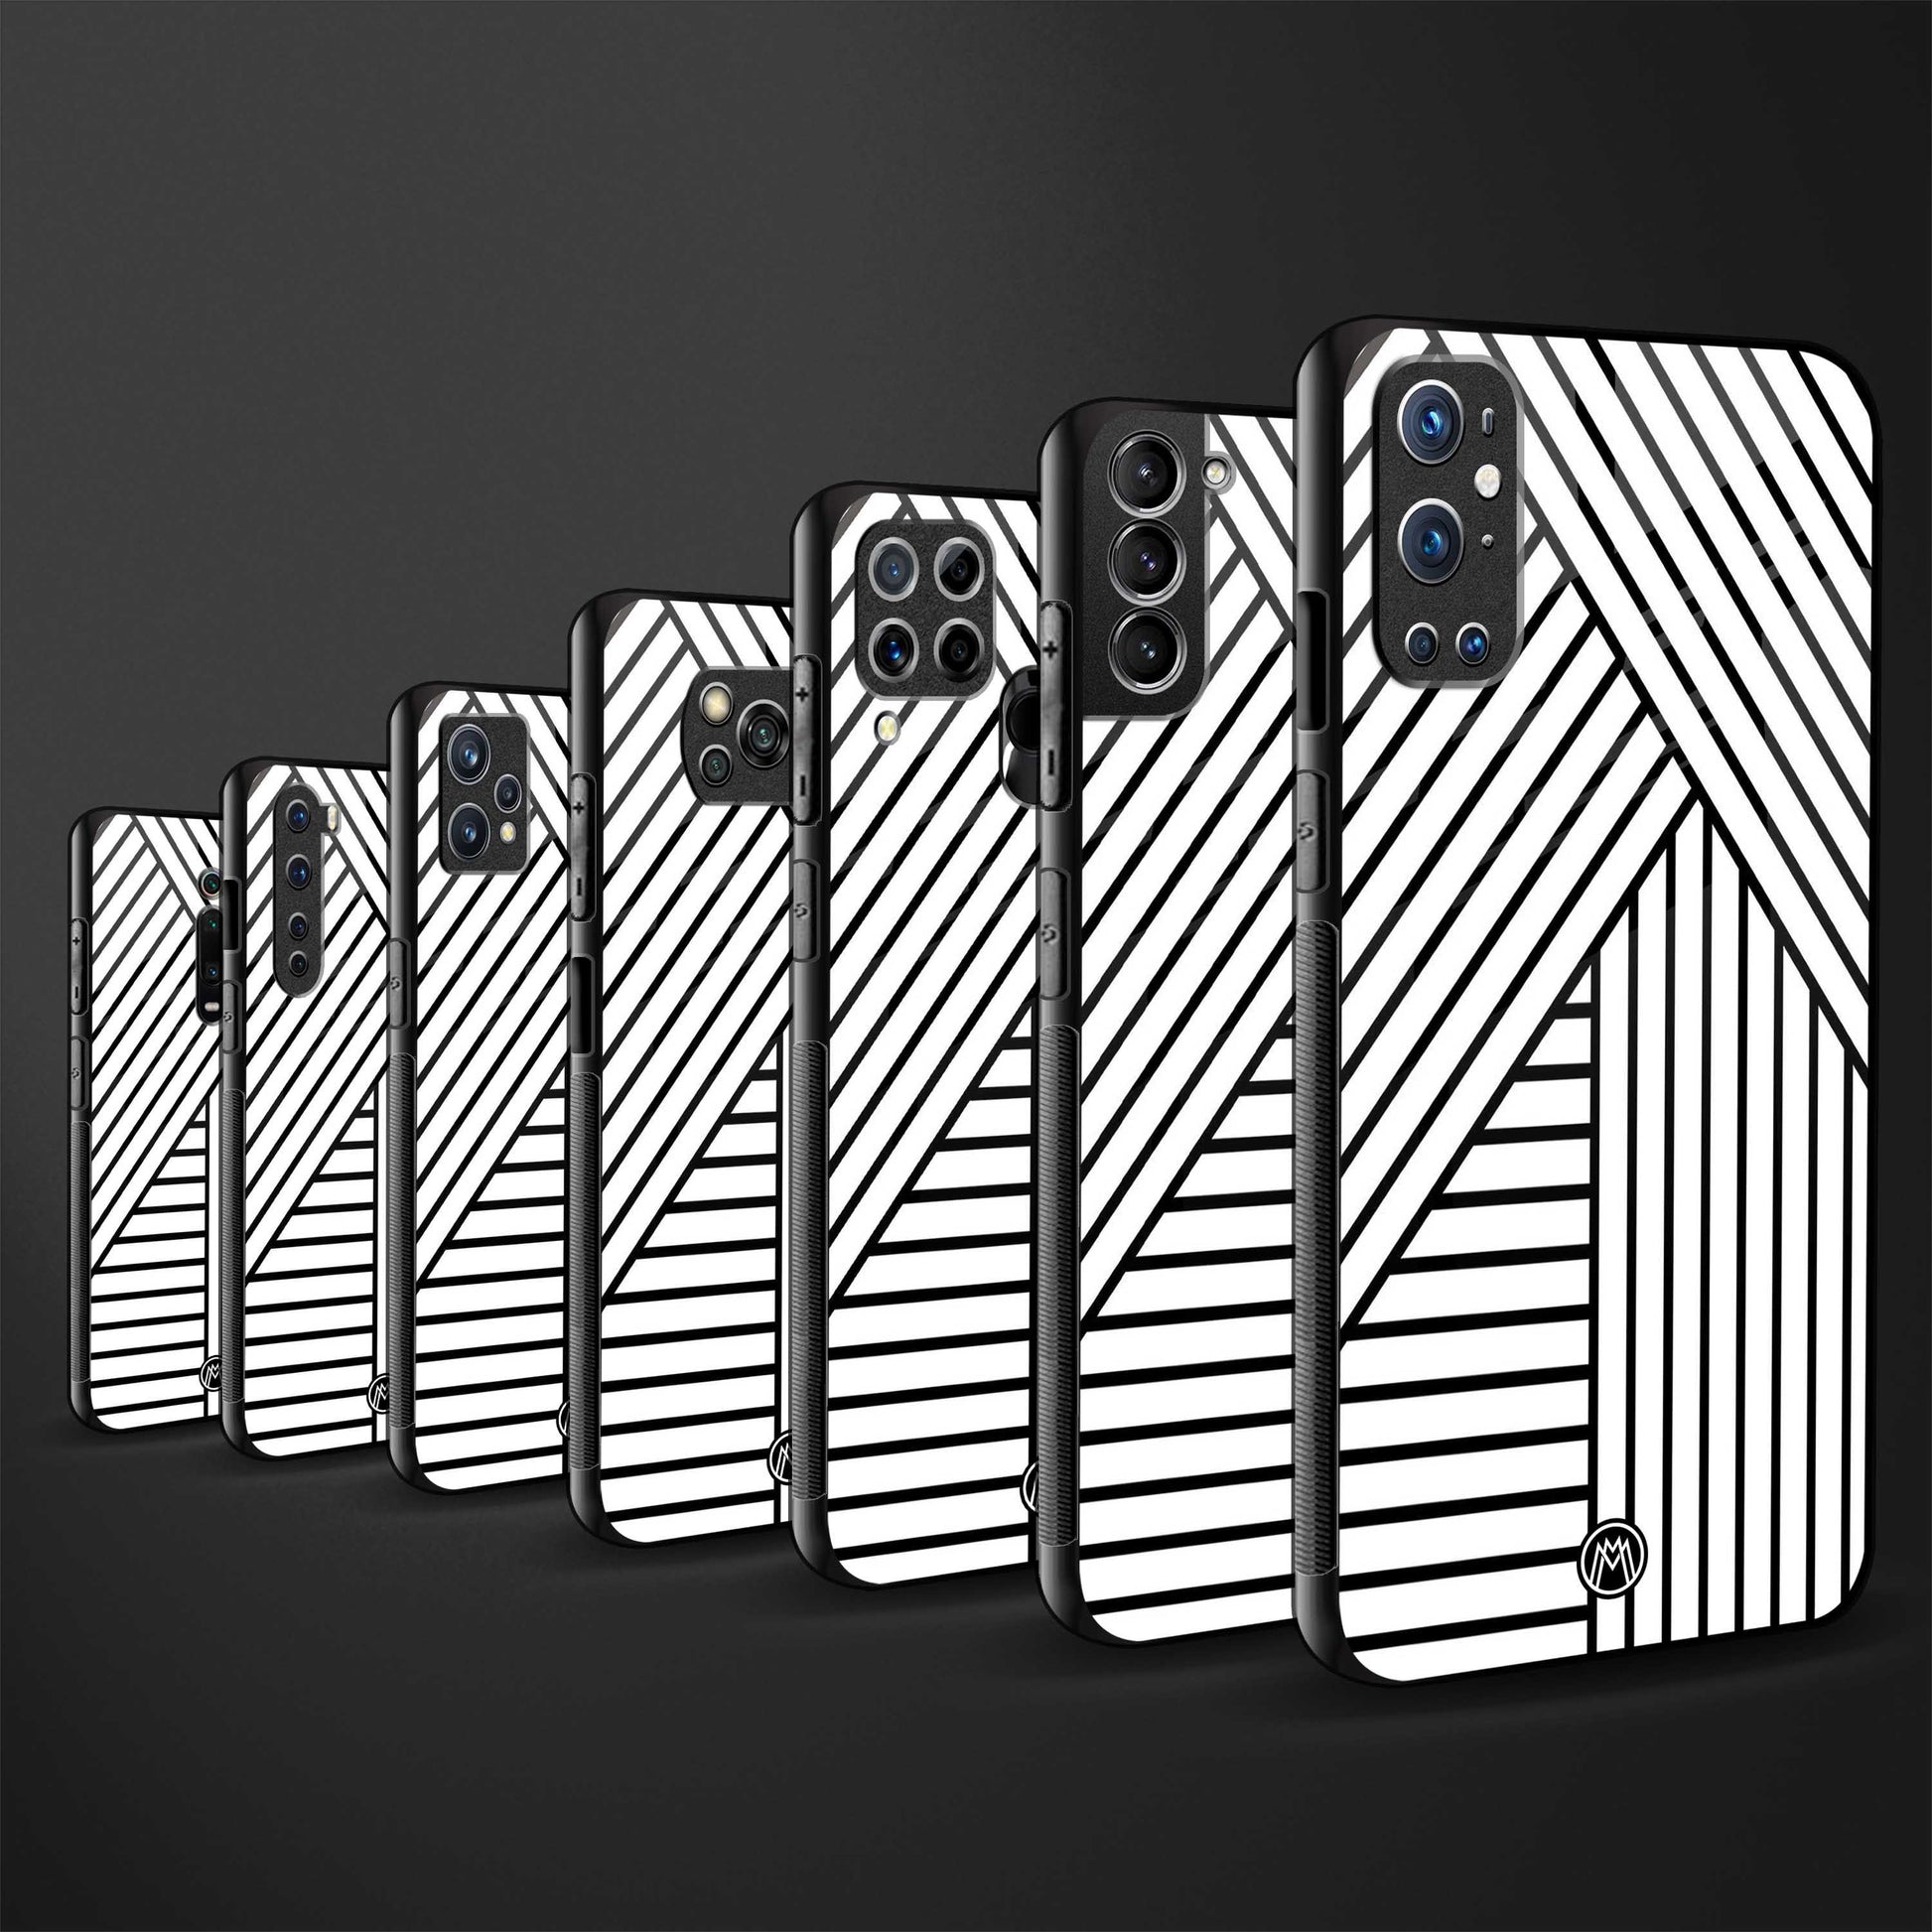 classic white black patten glass case for samsung galaxy a12